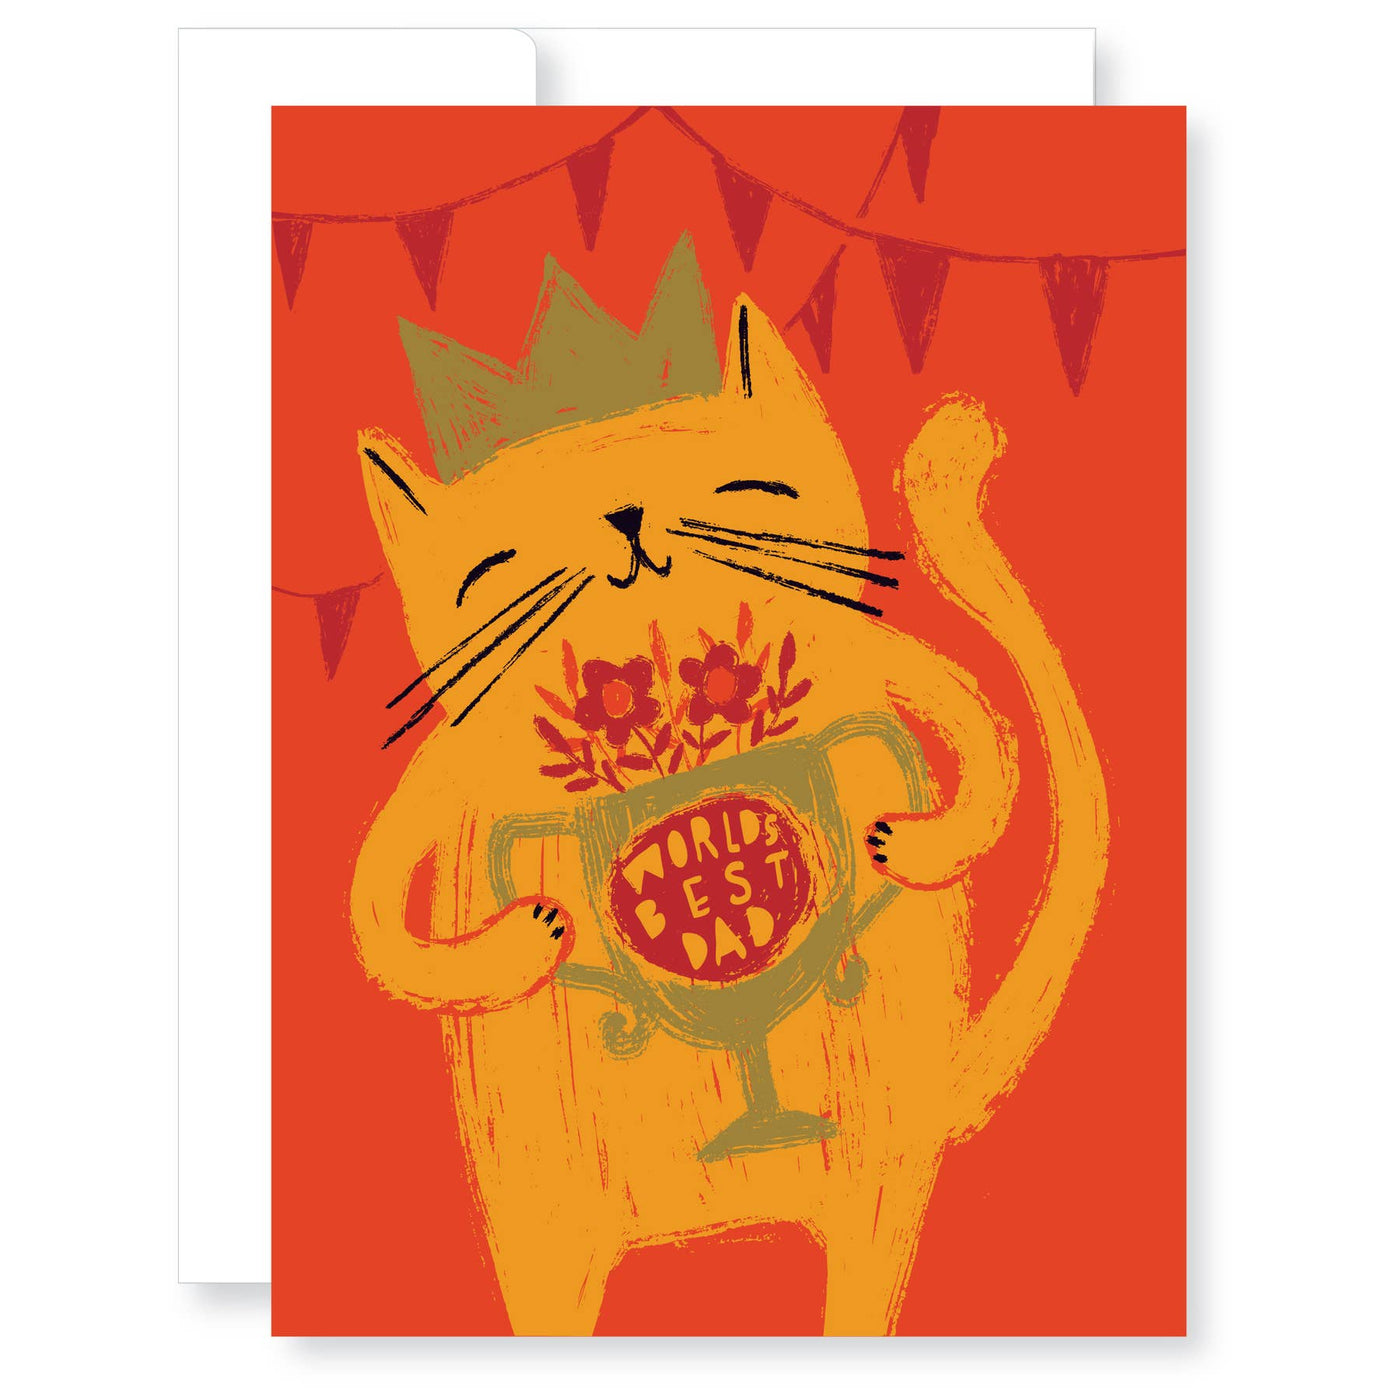 Best Dad Cat With Trophy Father's Day Greeting Card